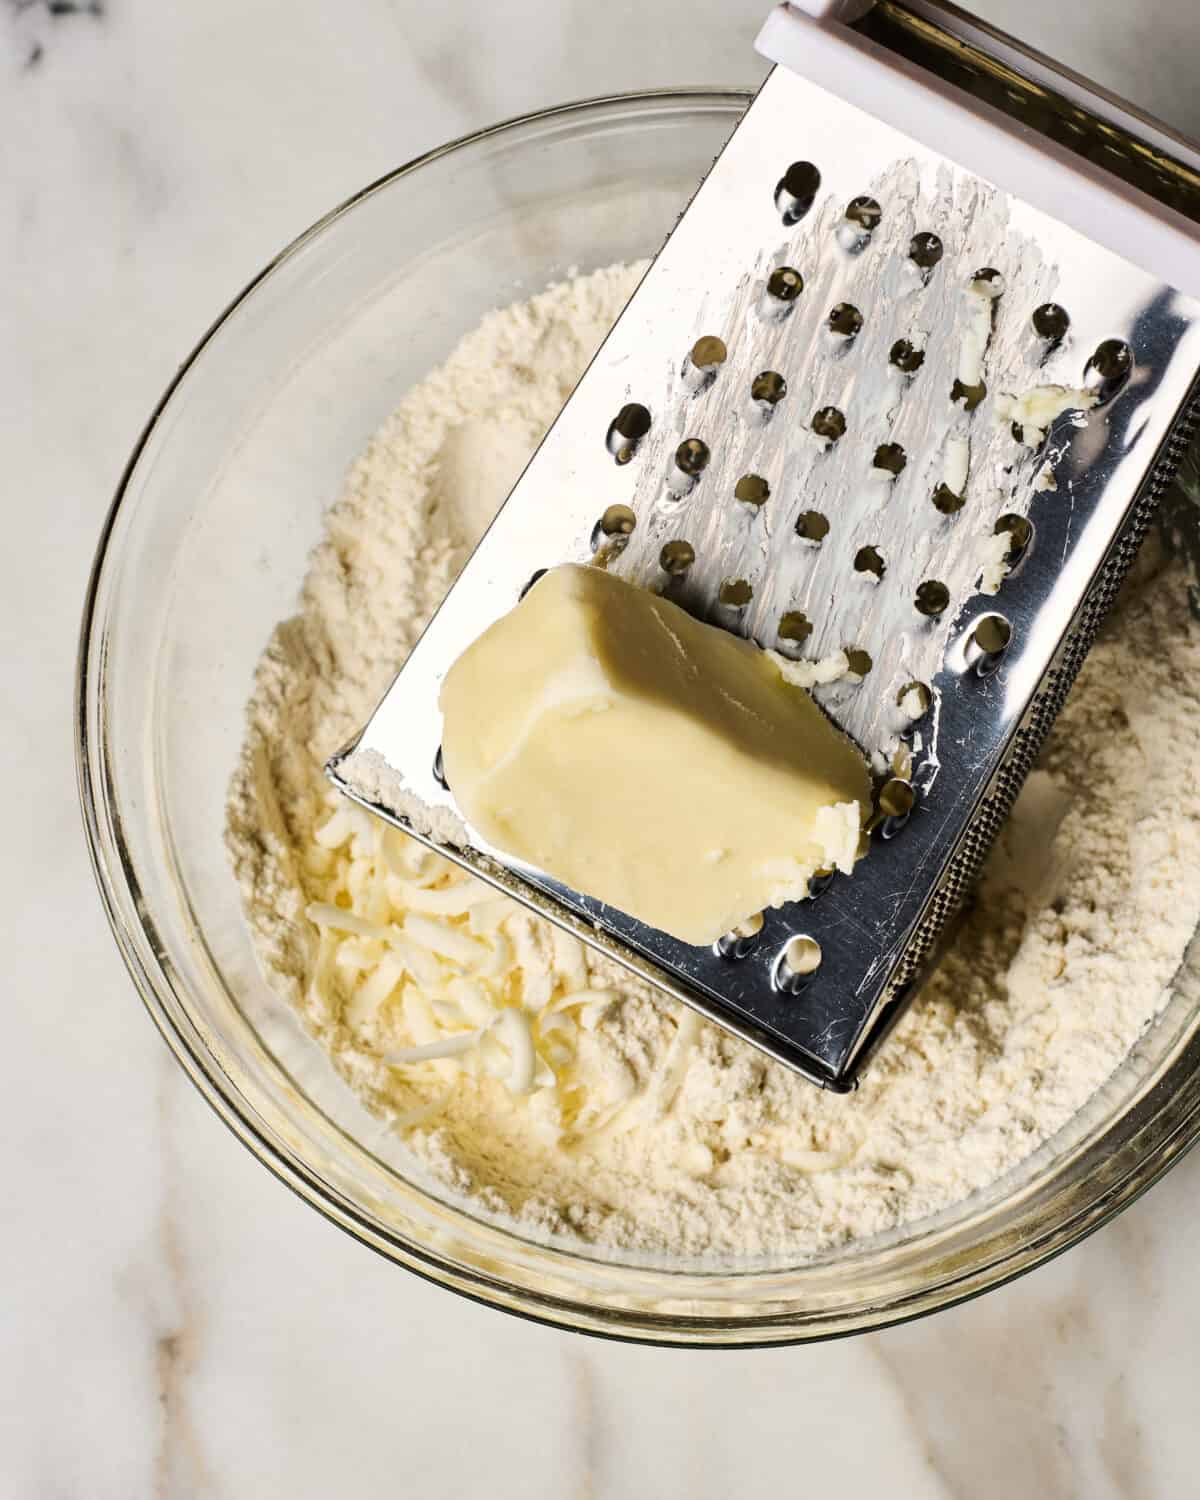 Butter being grated into a bowl. 